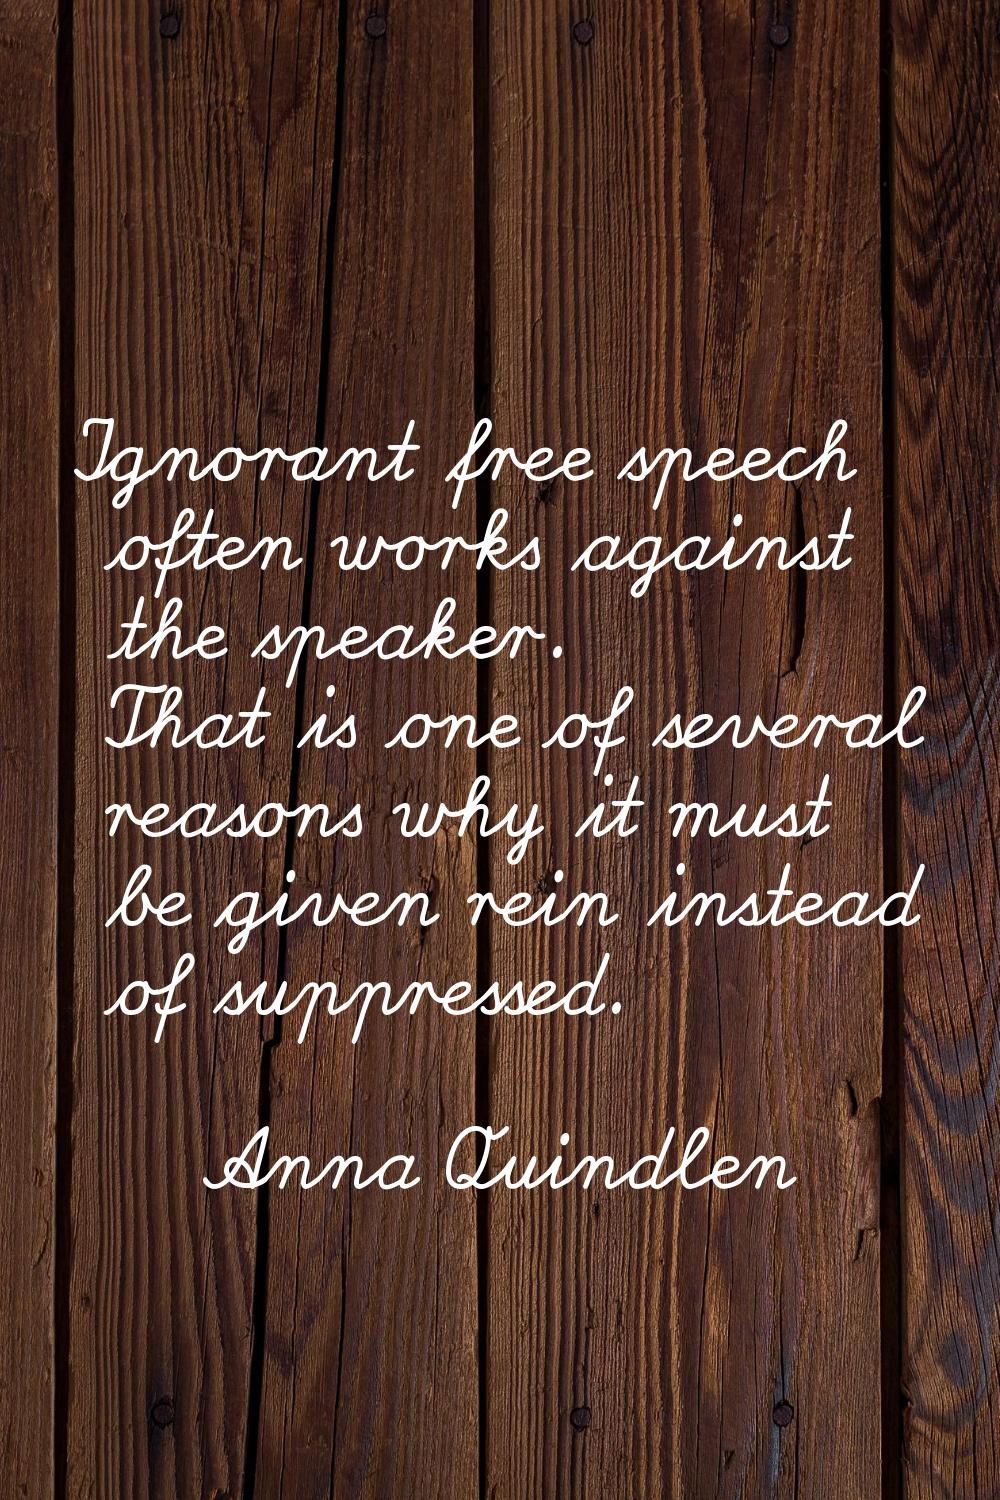 Ignorant free speech often works against the speaker. That is one of several reasons why it must be